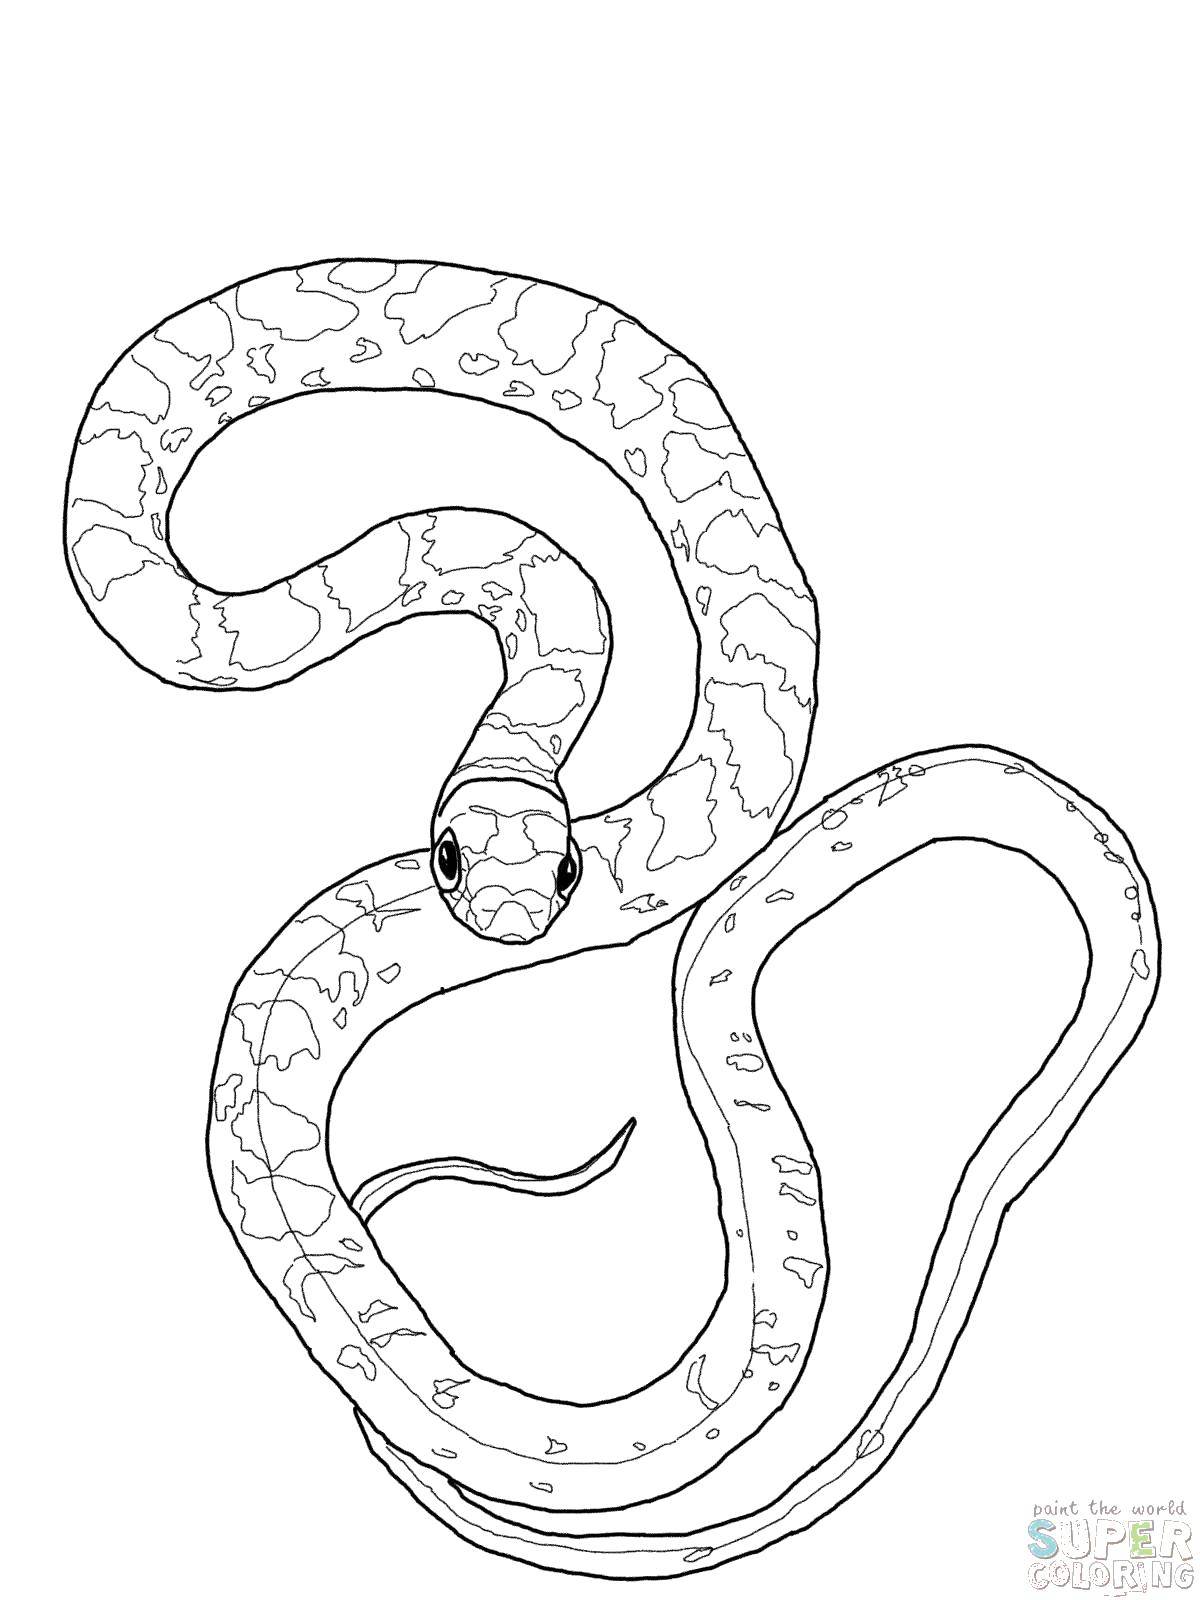 Coloring Long snake. Category The snake. Tags:  Reptile, snake.